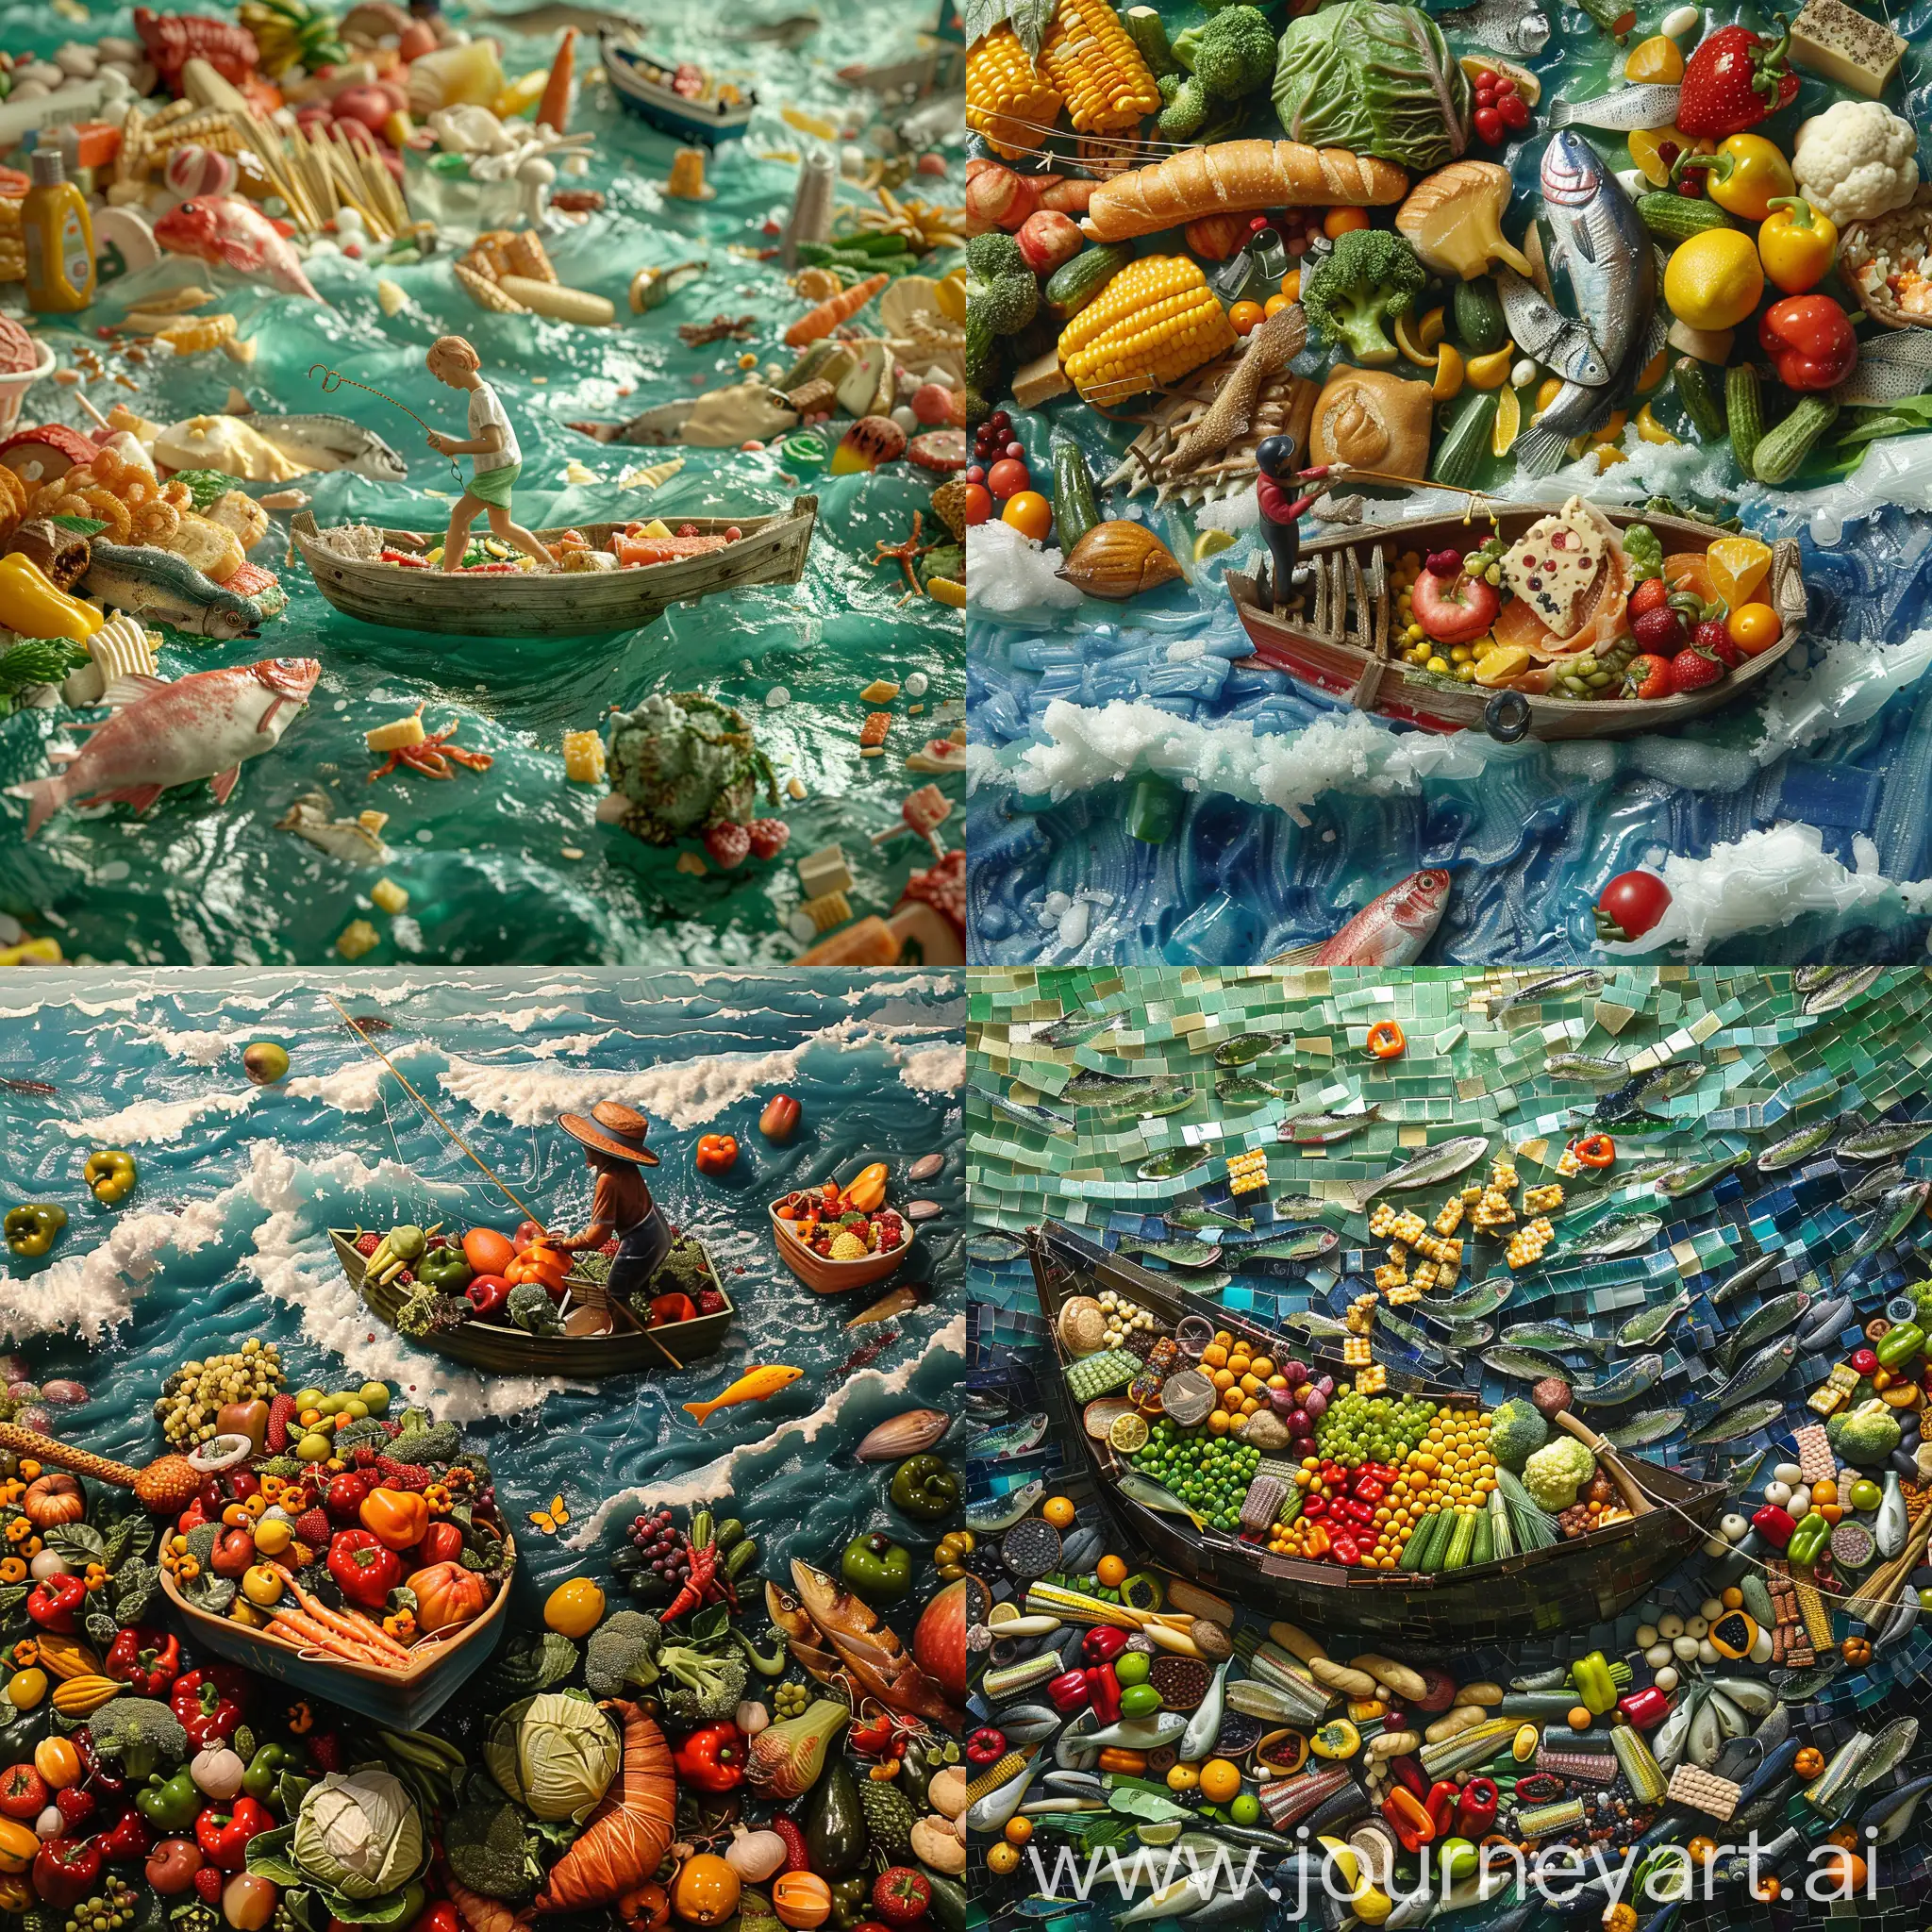 Fisherman-Catching-Food-on-a-Sea-of-Supermarket-Goods